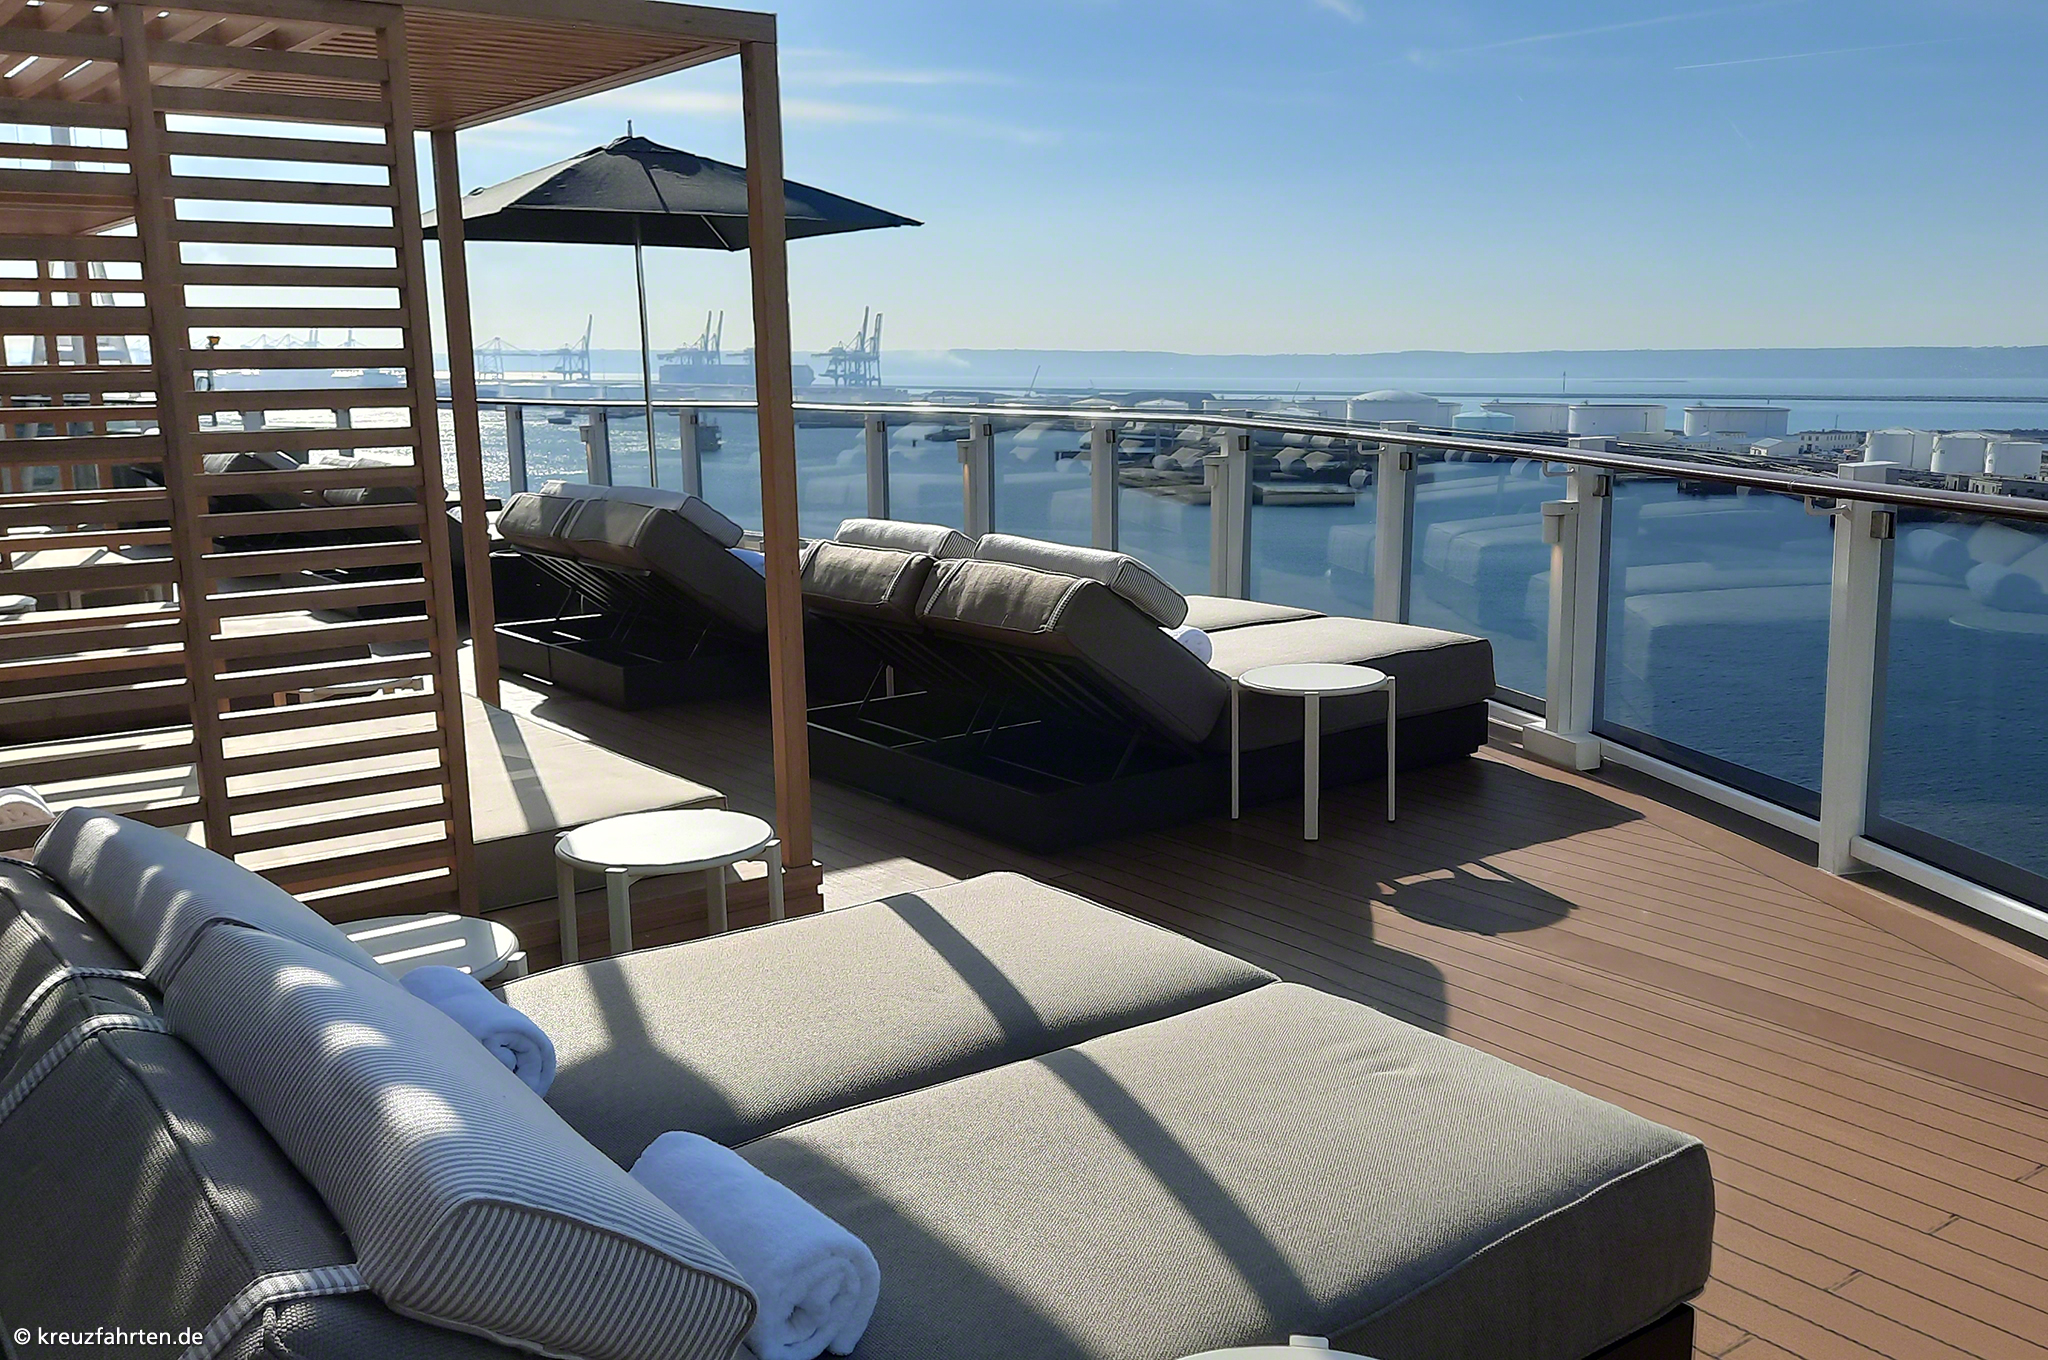 The Haven Sundeck